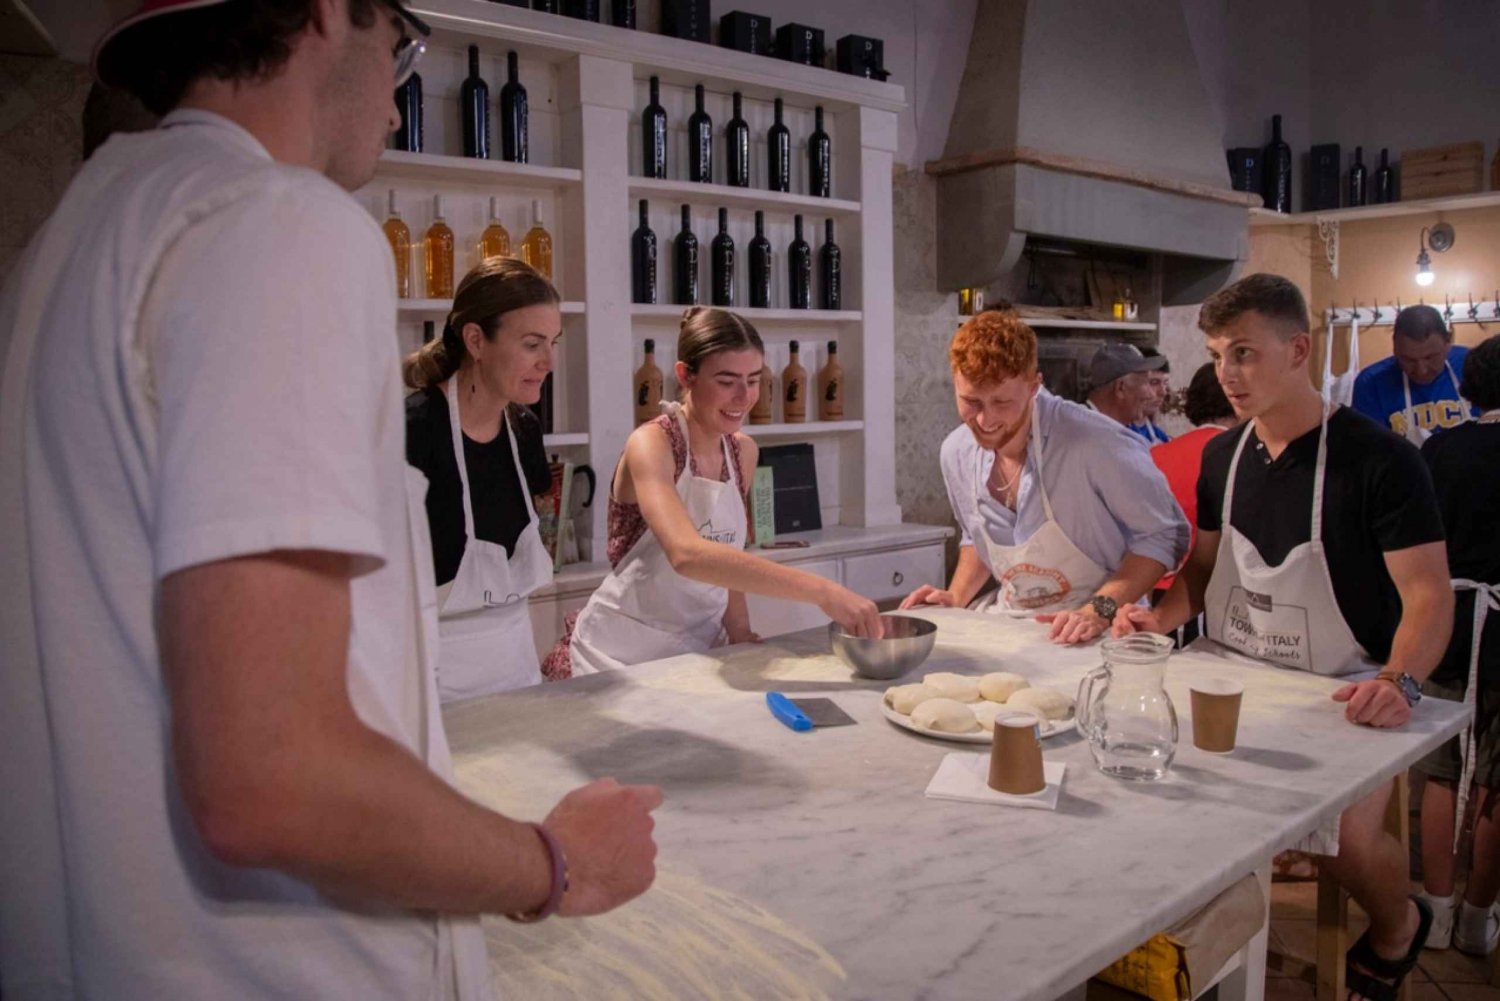 Florence: Craft your own Pizza and Watch how to Make Gelato